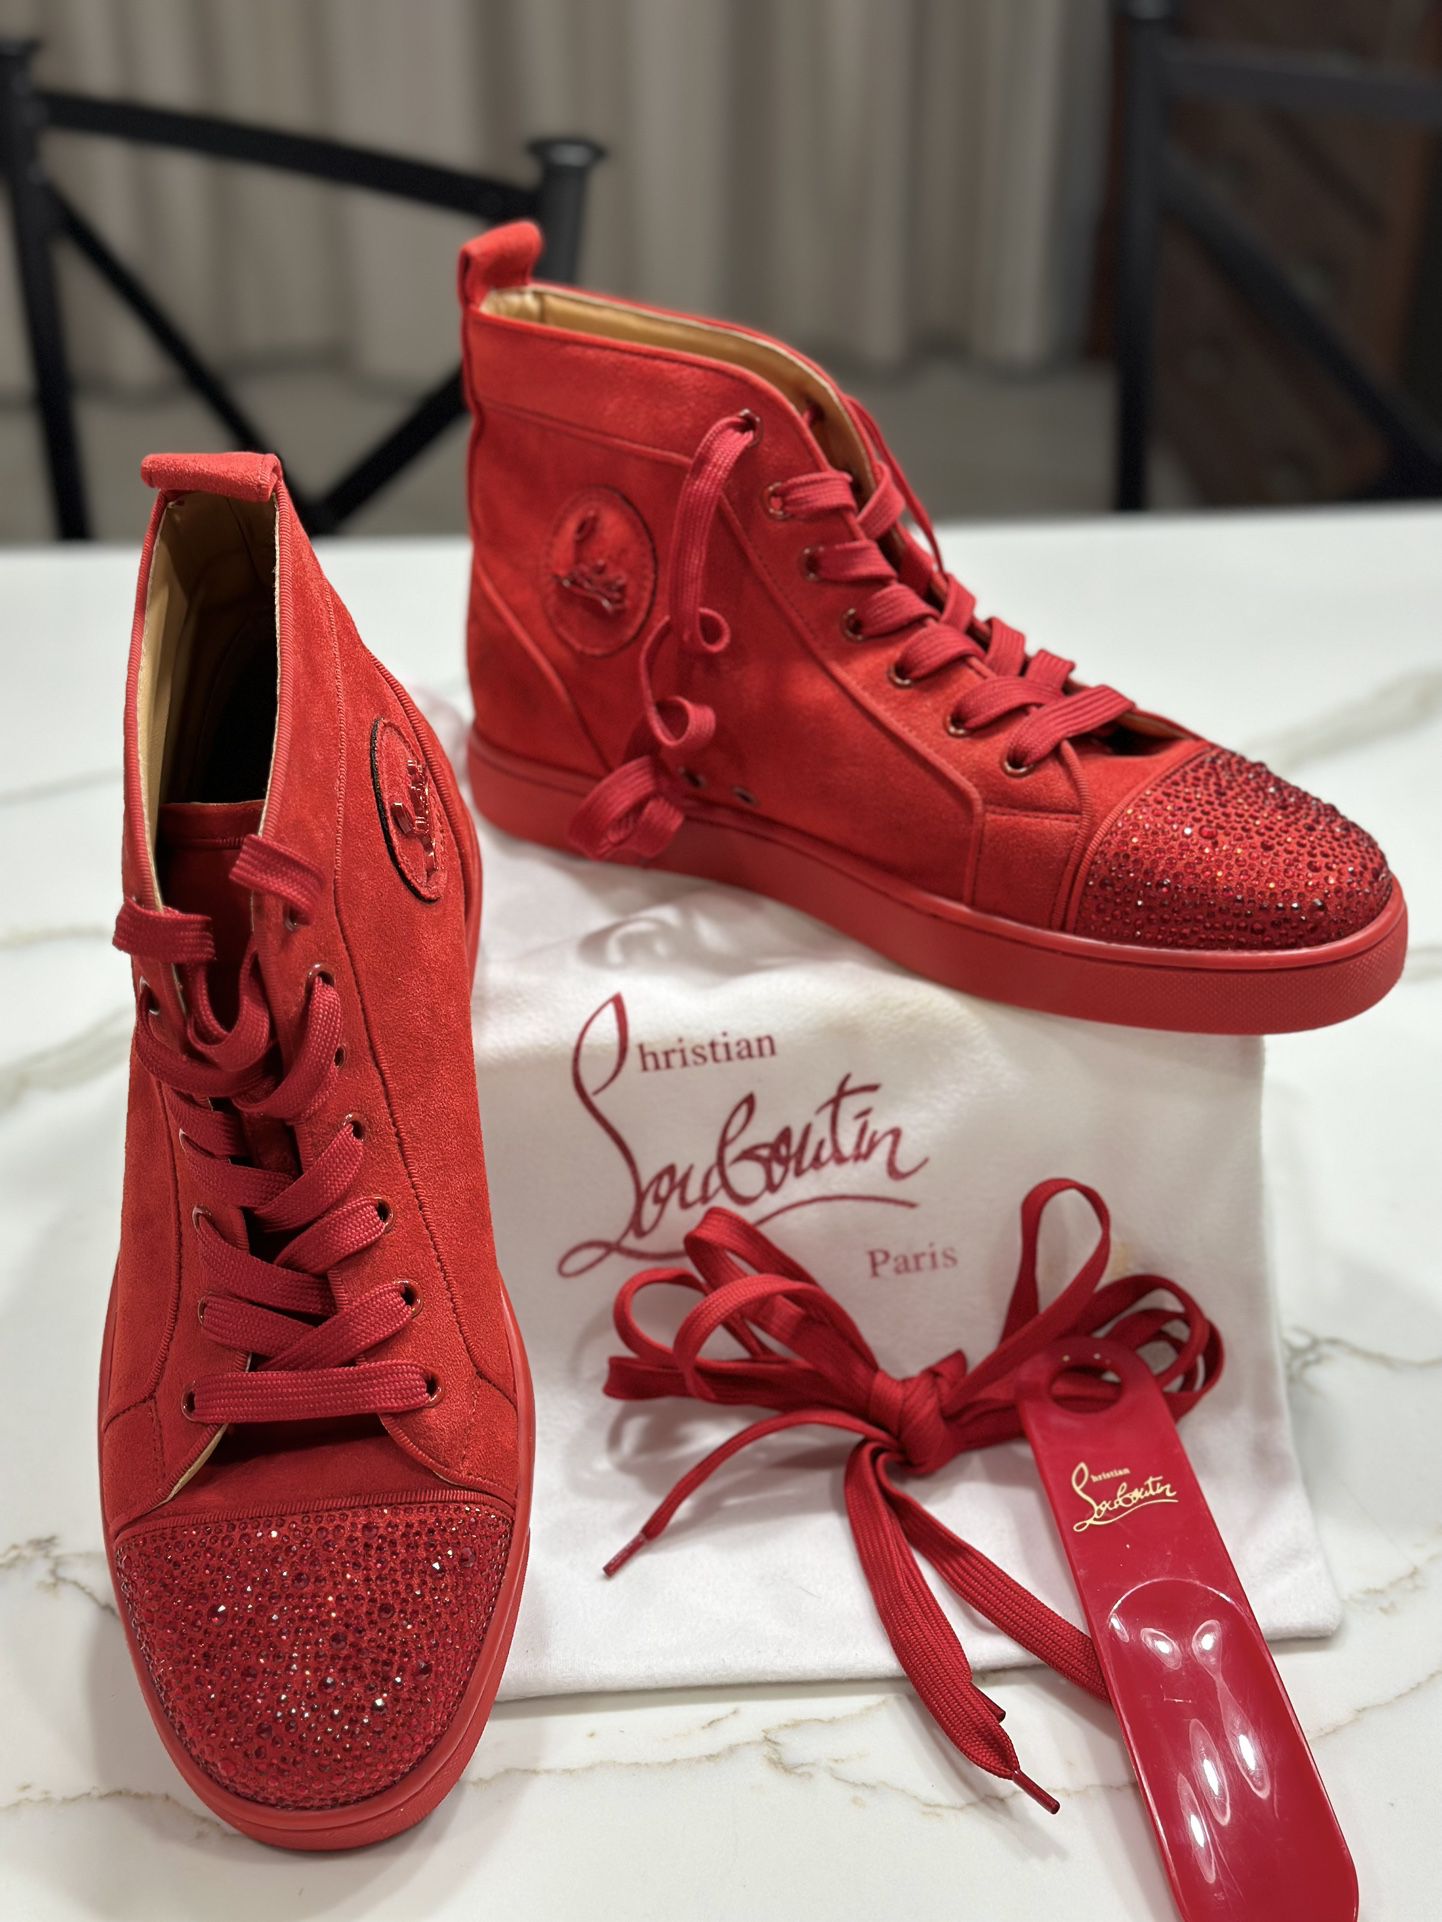 Louboutin Red High Top Sneakers for Sale in Belle Isle, FL - OfferUp